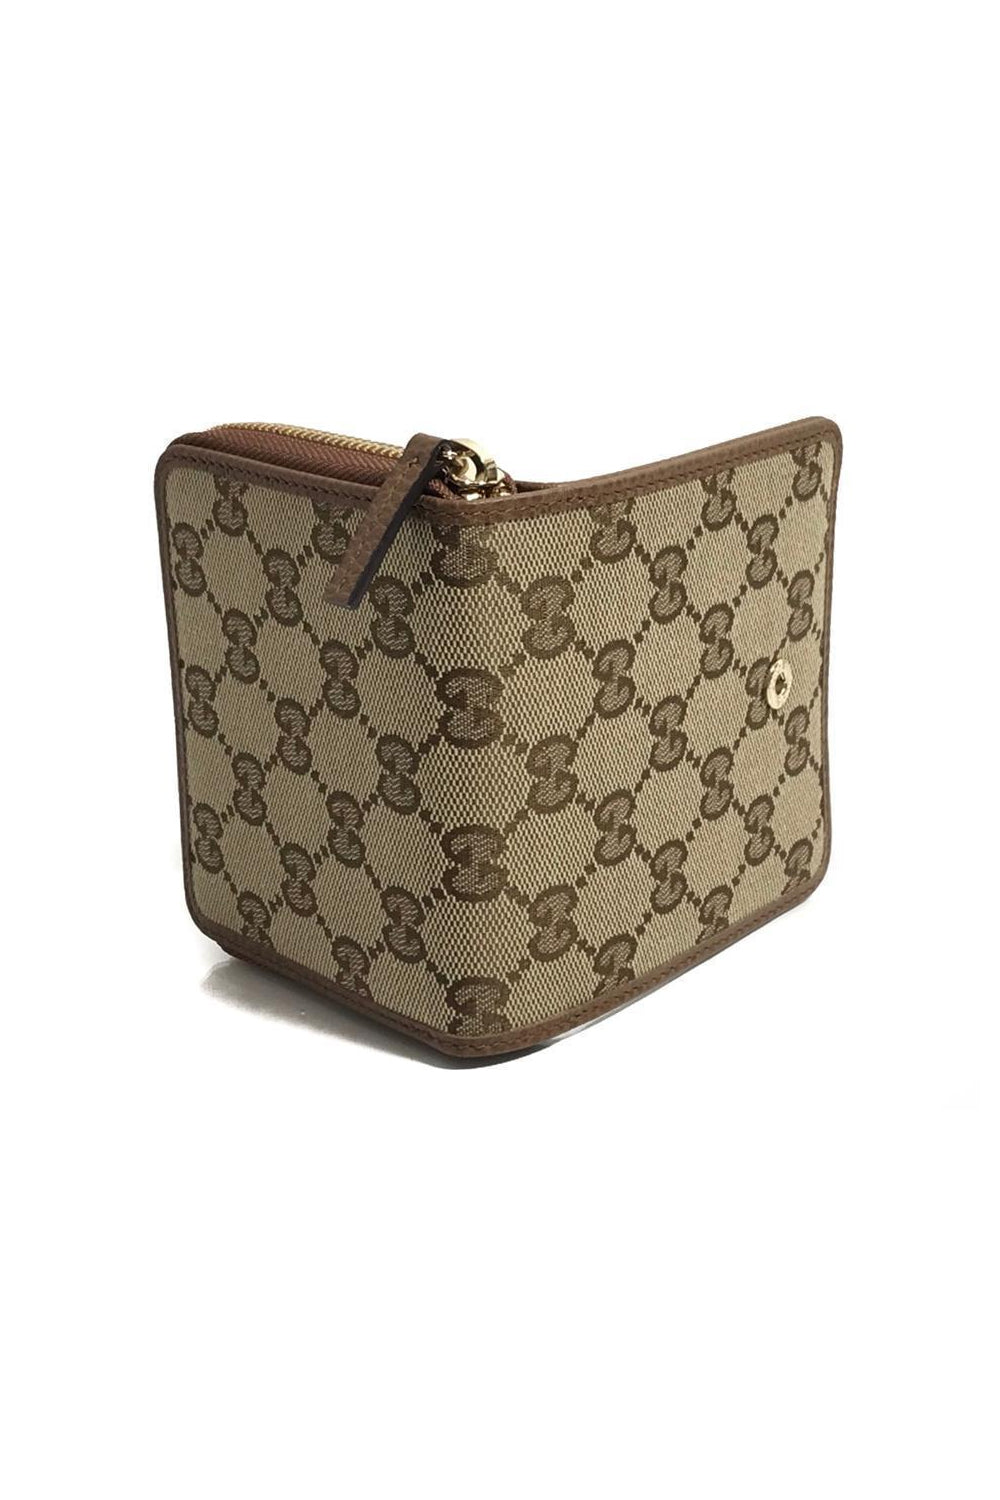 Gucci Original GG Canvas Brown Leather Wallet